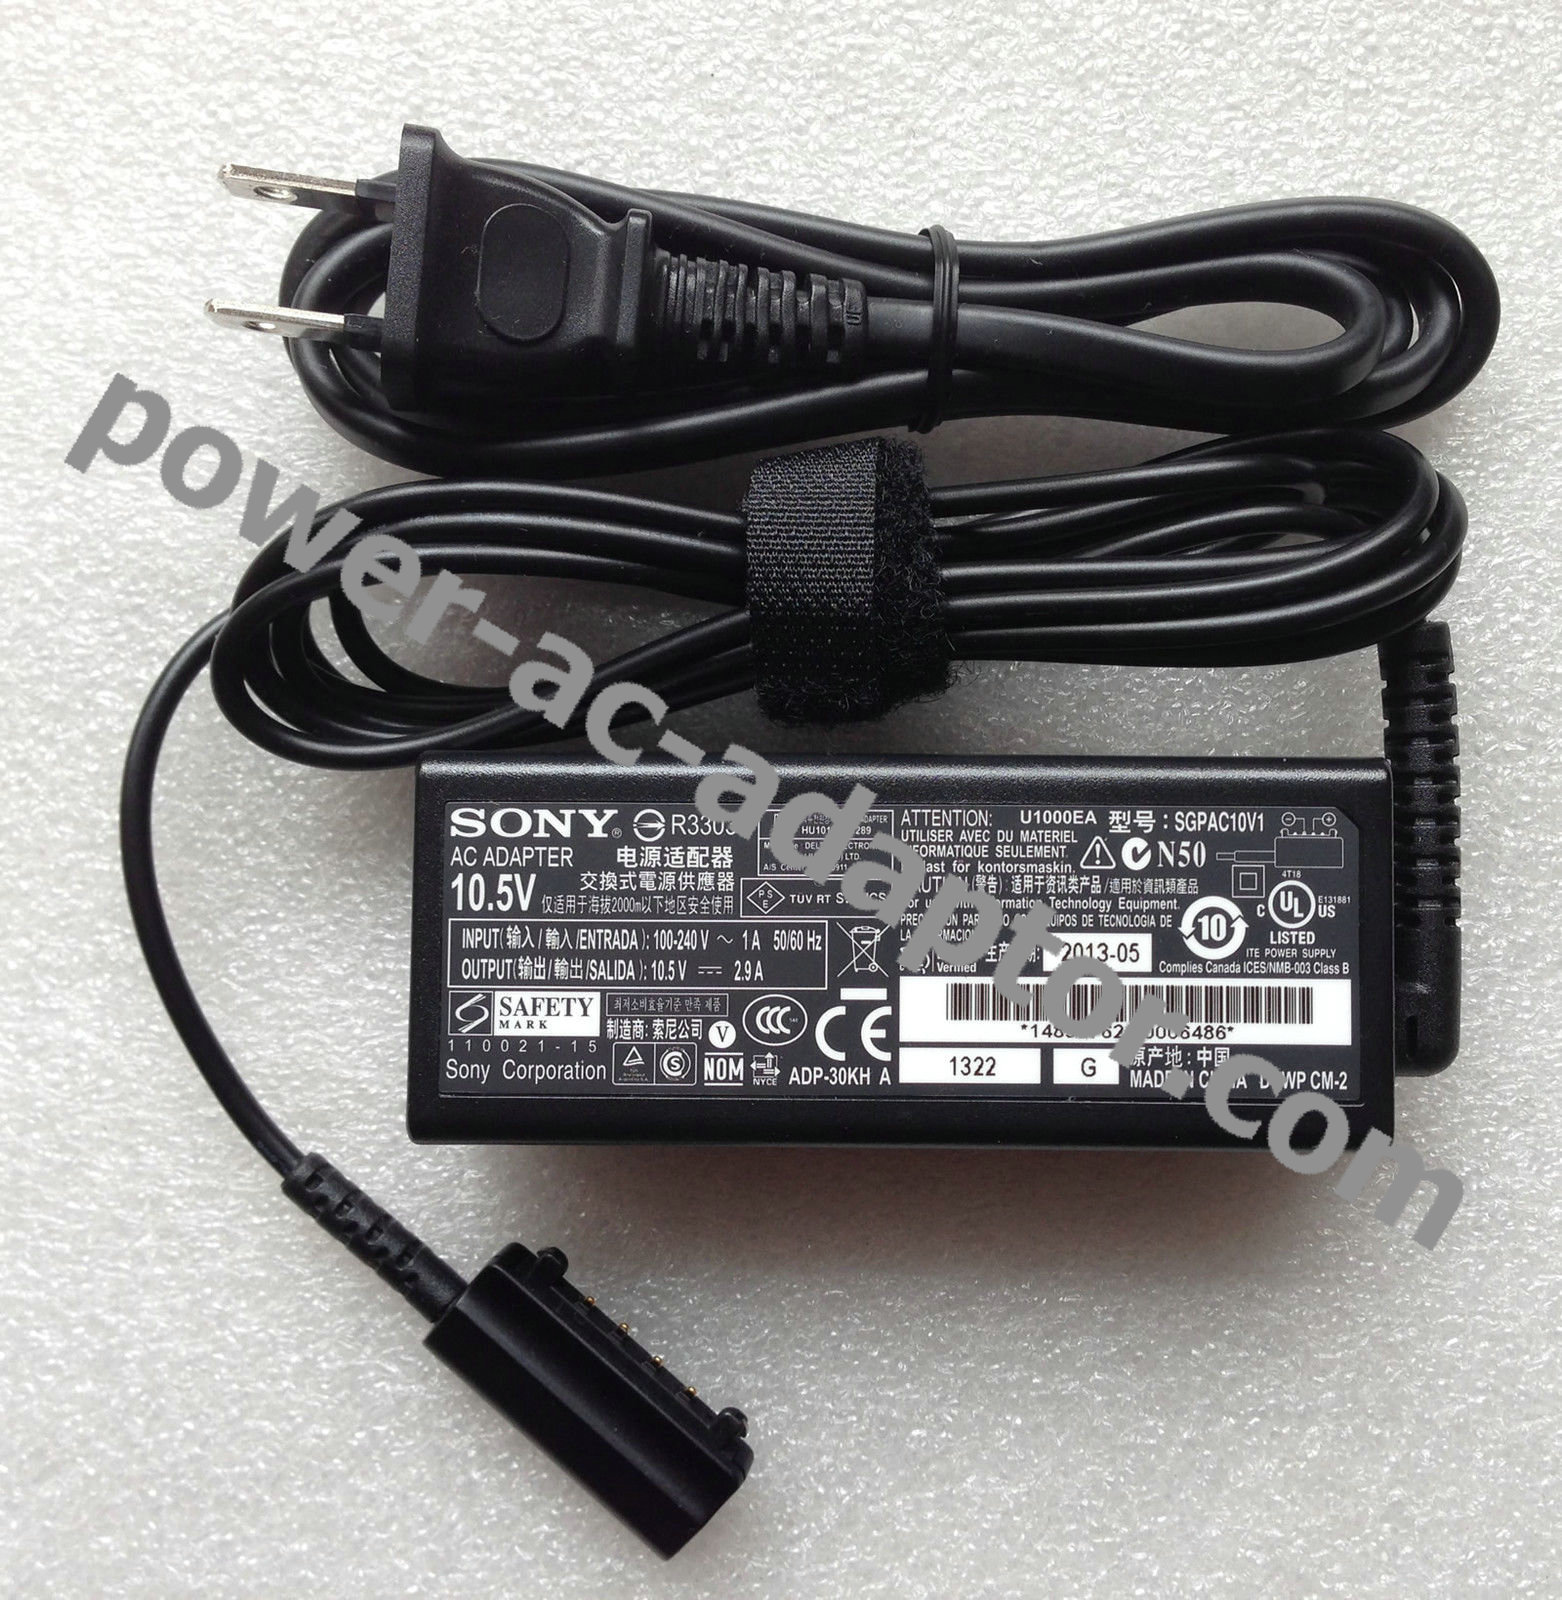 Genuine Sony SGPT111ARS SGPAC10V1 ADP-30KH A AC Adapter Cord